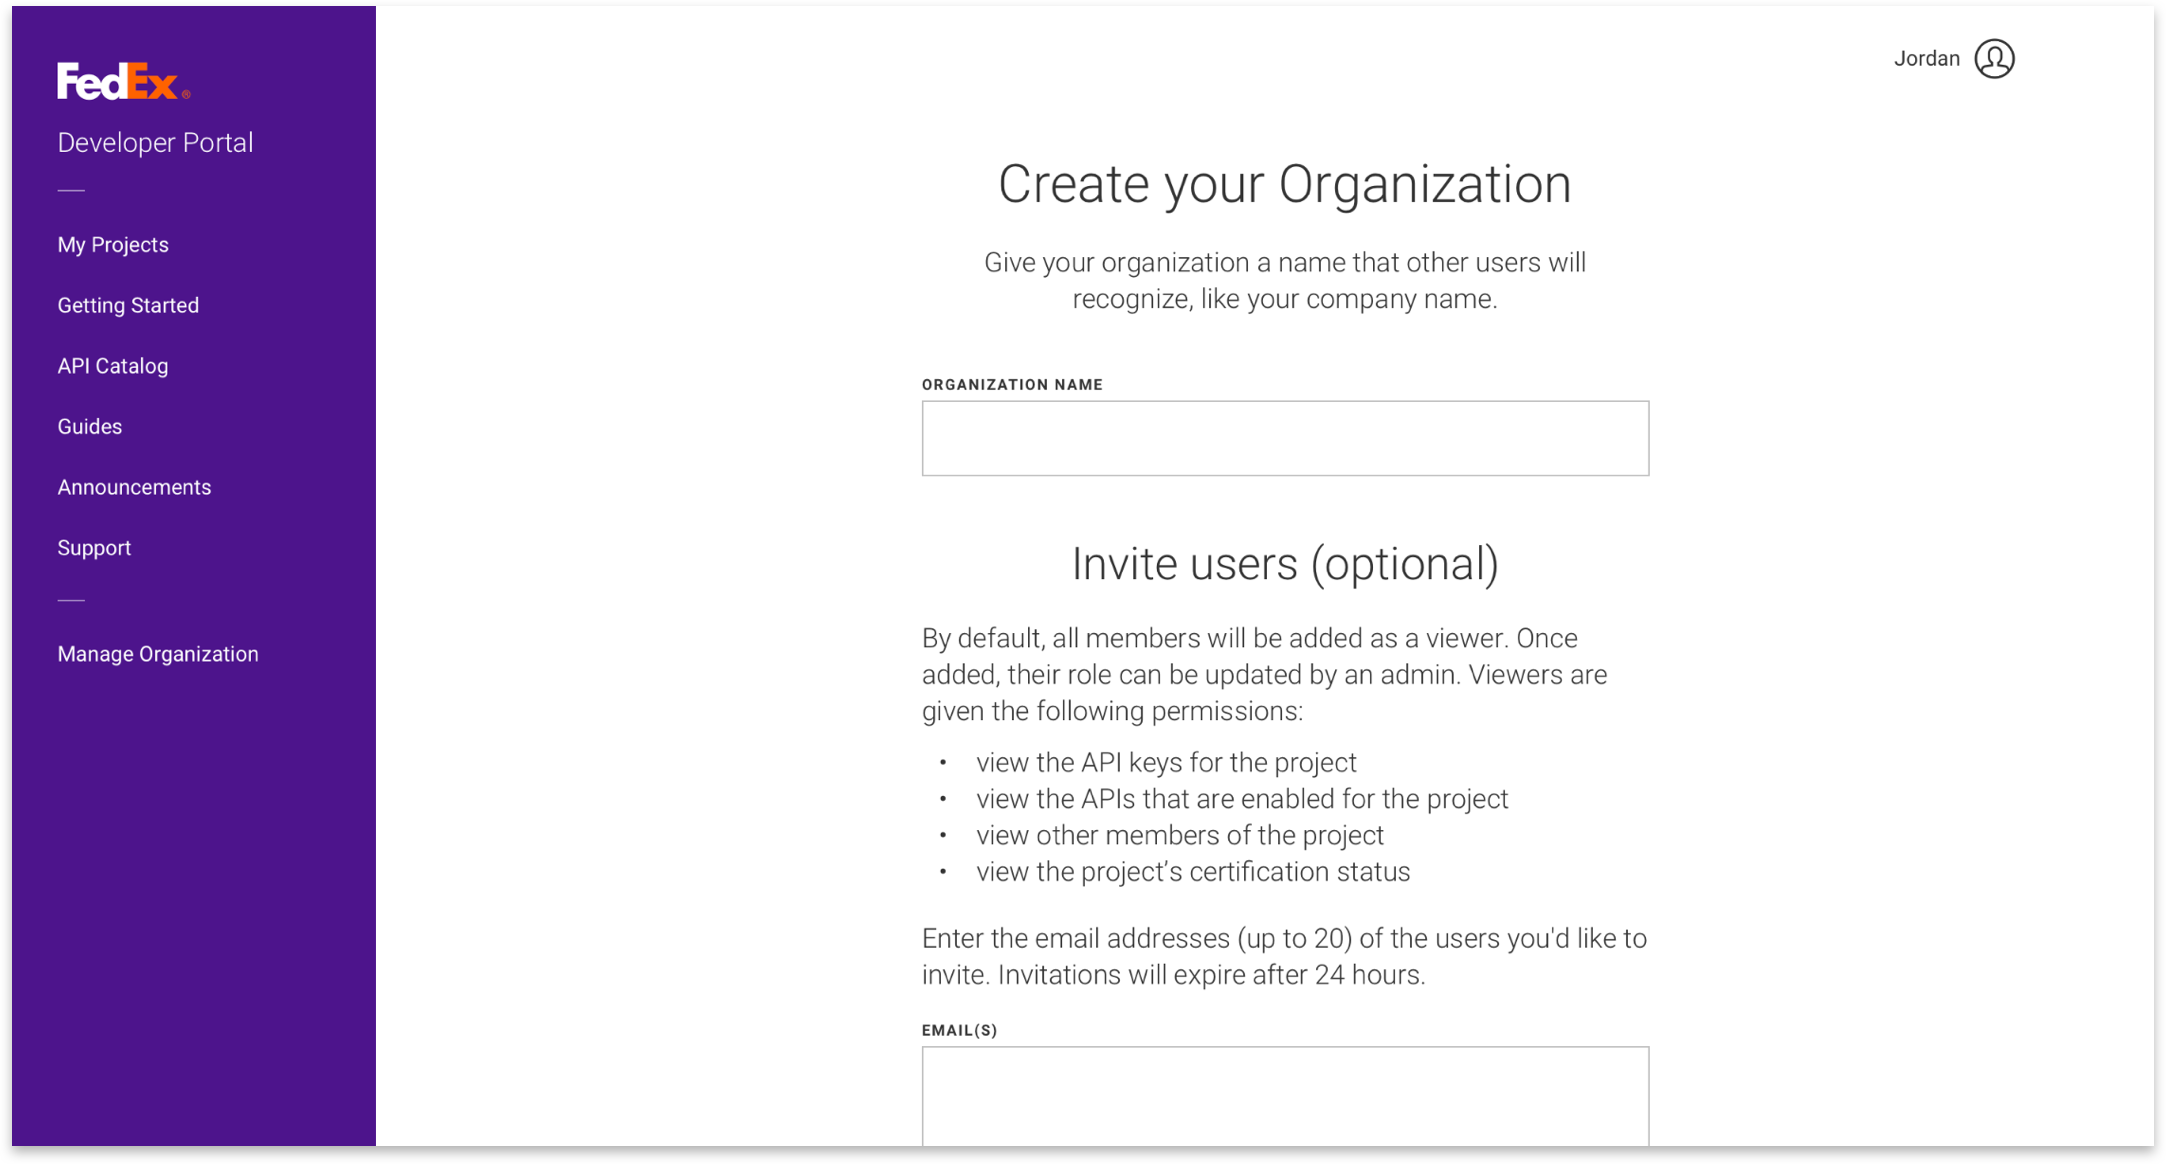 screenshot of Create your organization page